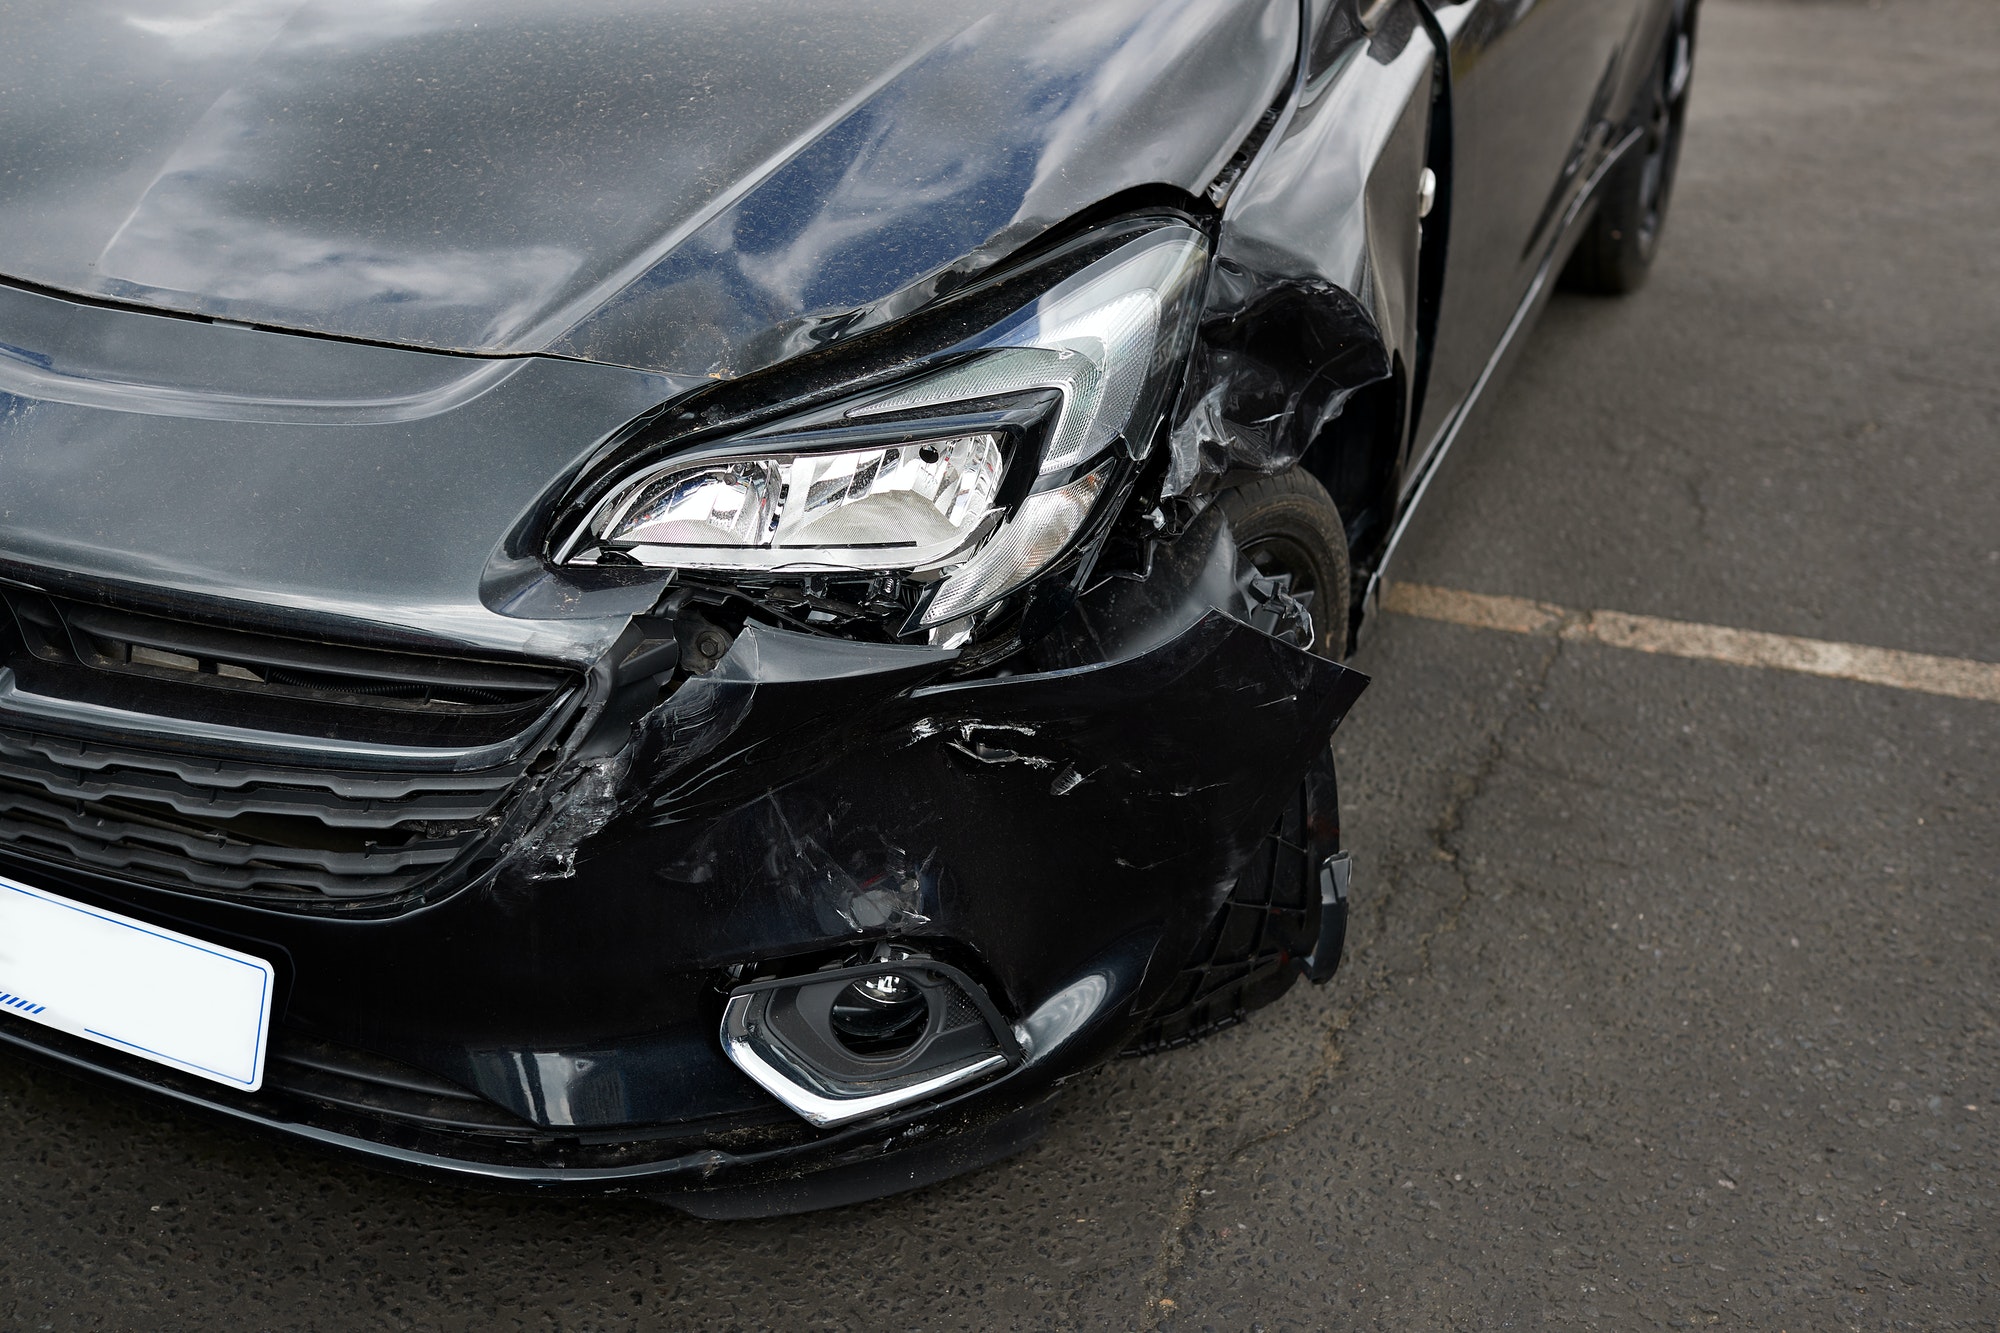 Detail Of Damage To Headlight Of Vehicle In Car Park